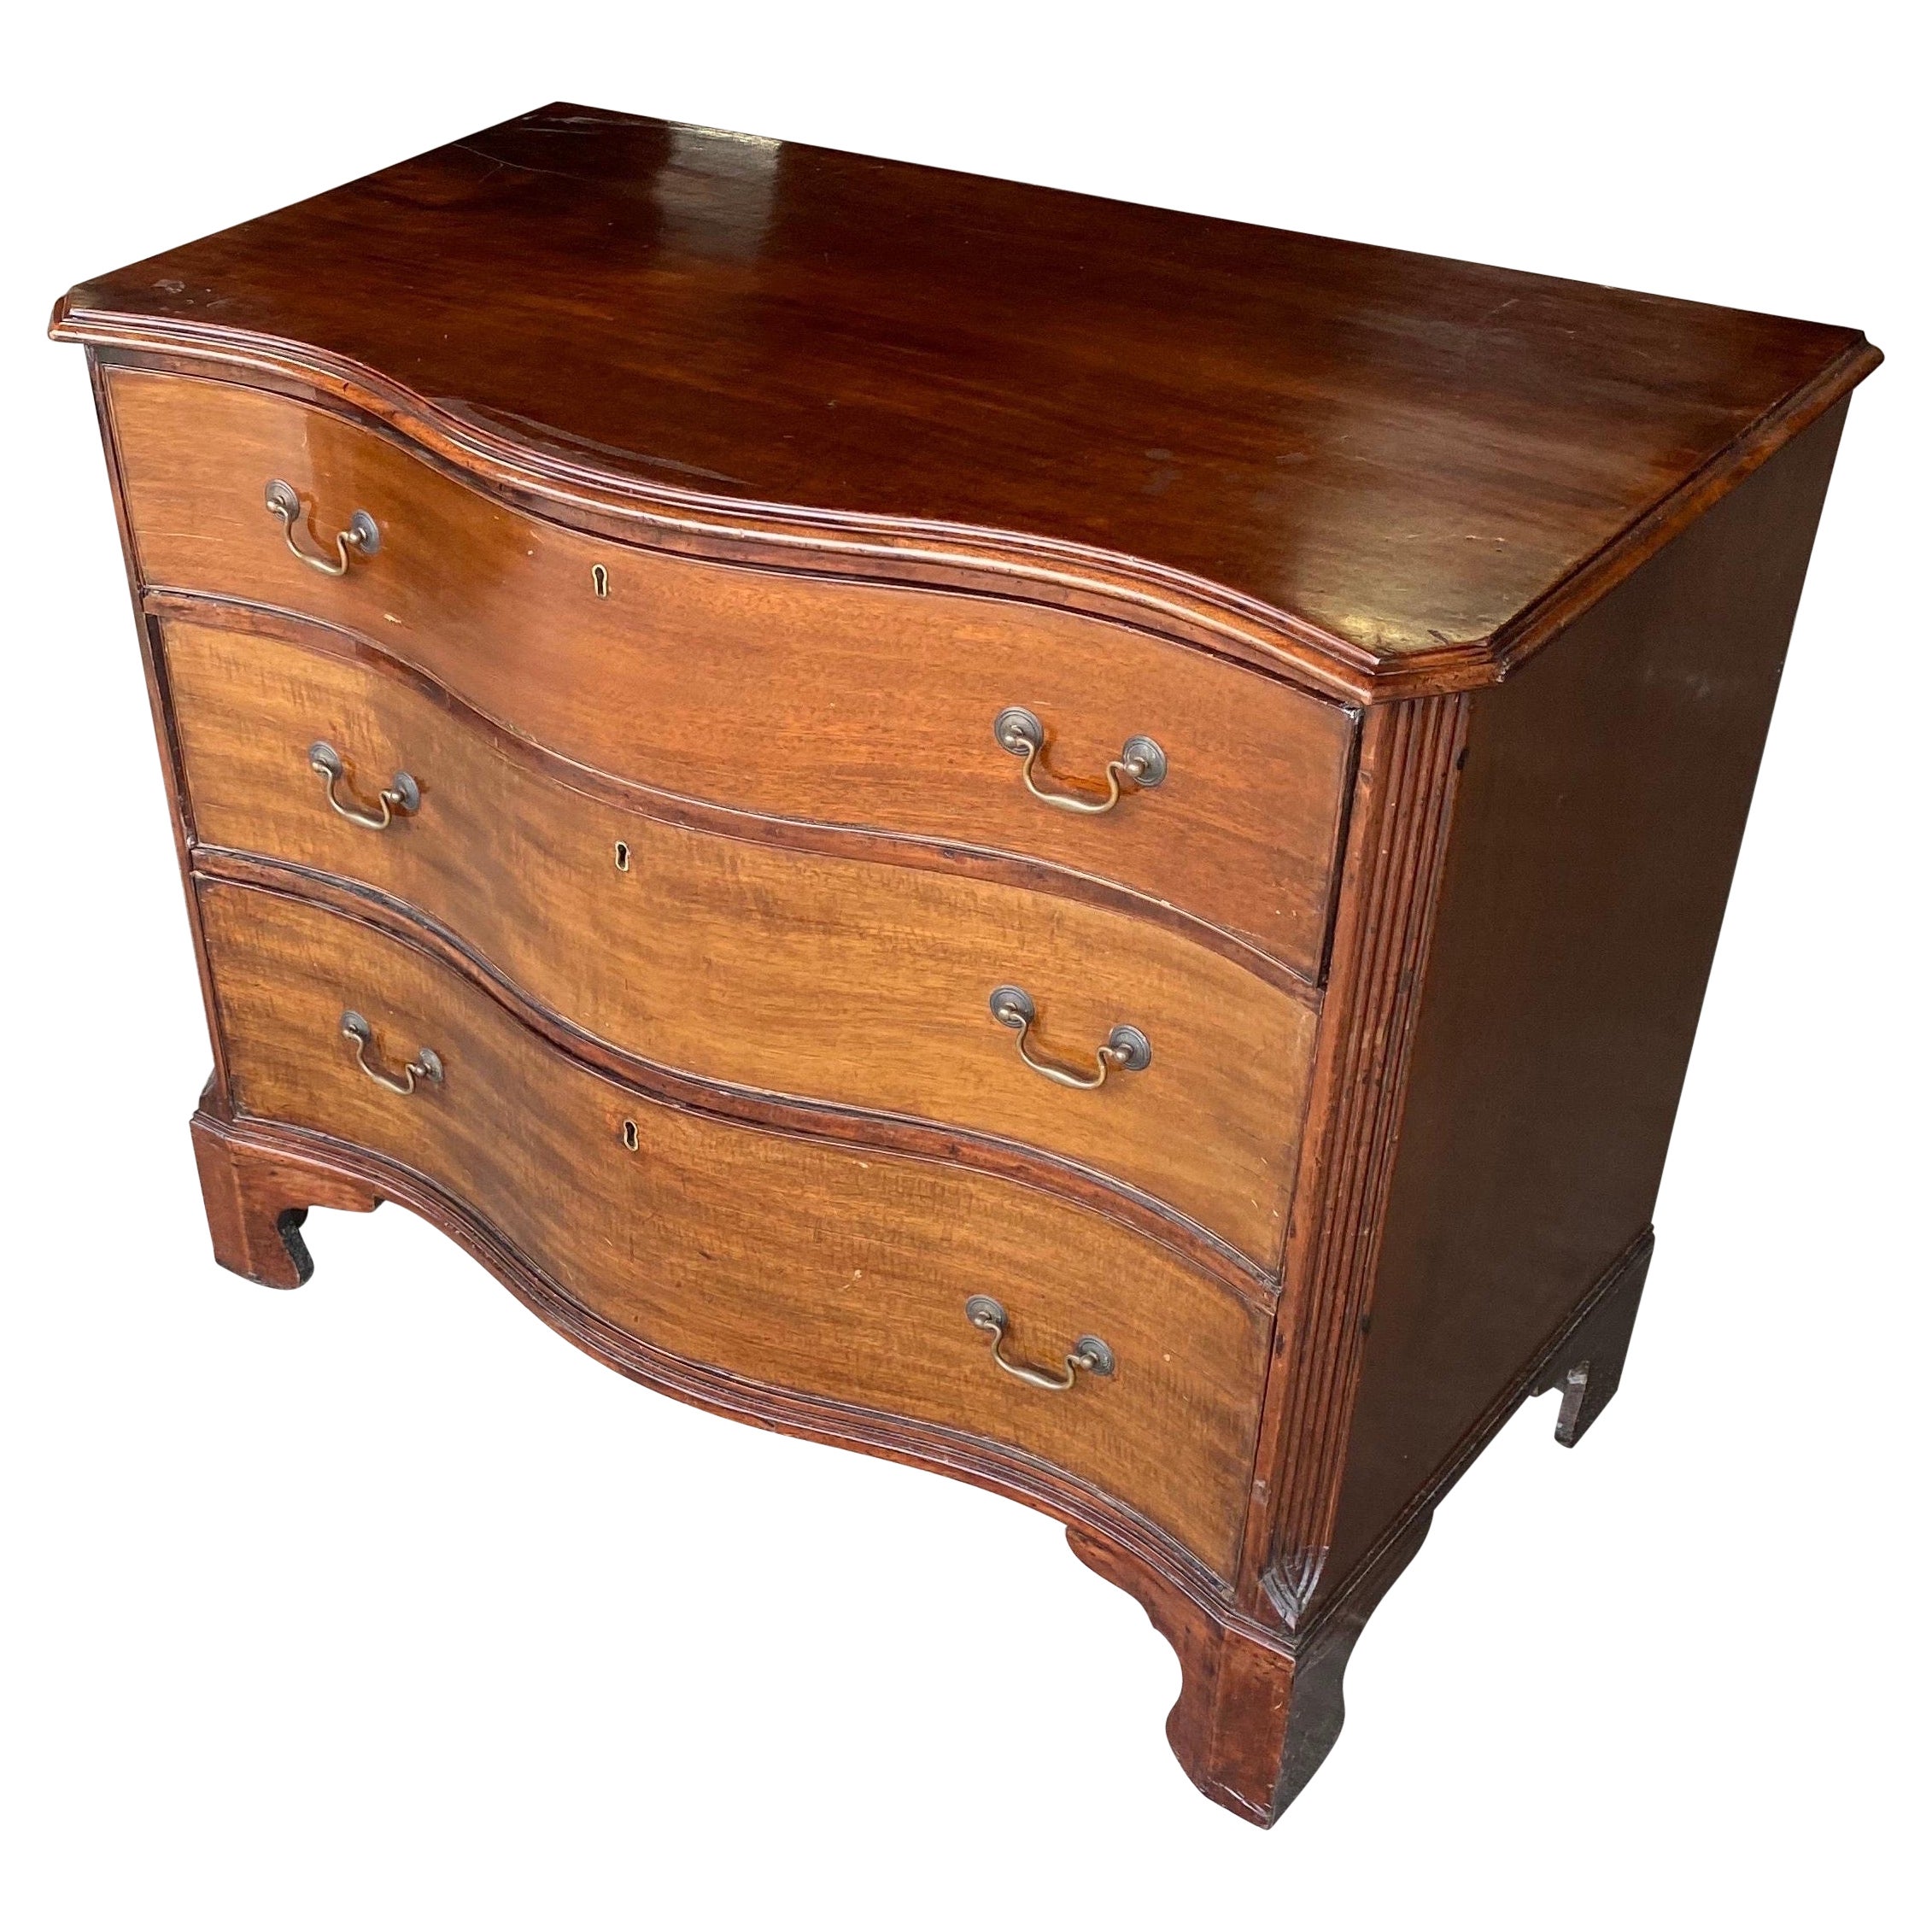 18th-Early 19th Century Georgian Mahogany Serpentine Bedside Chest For Sale